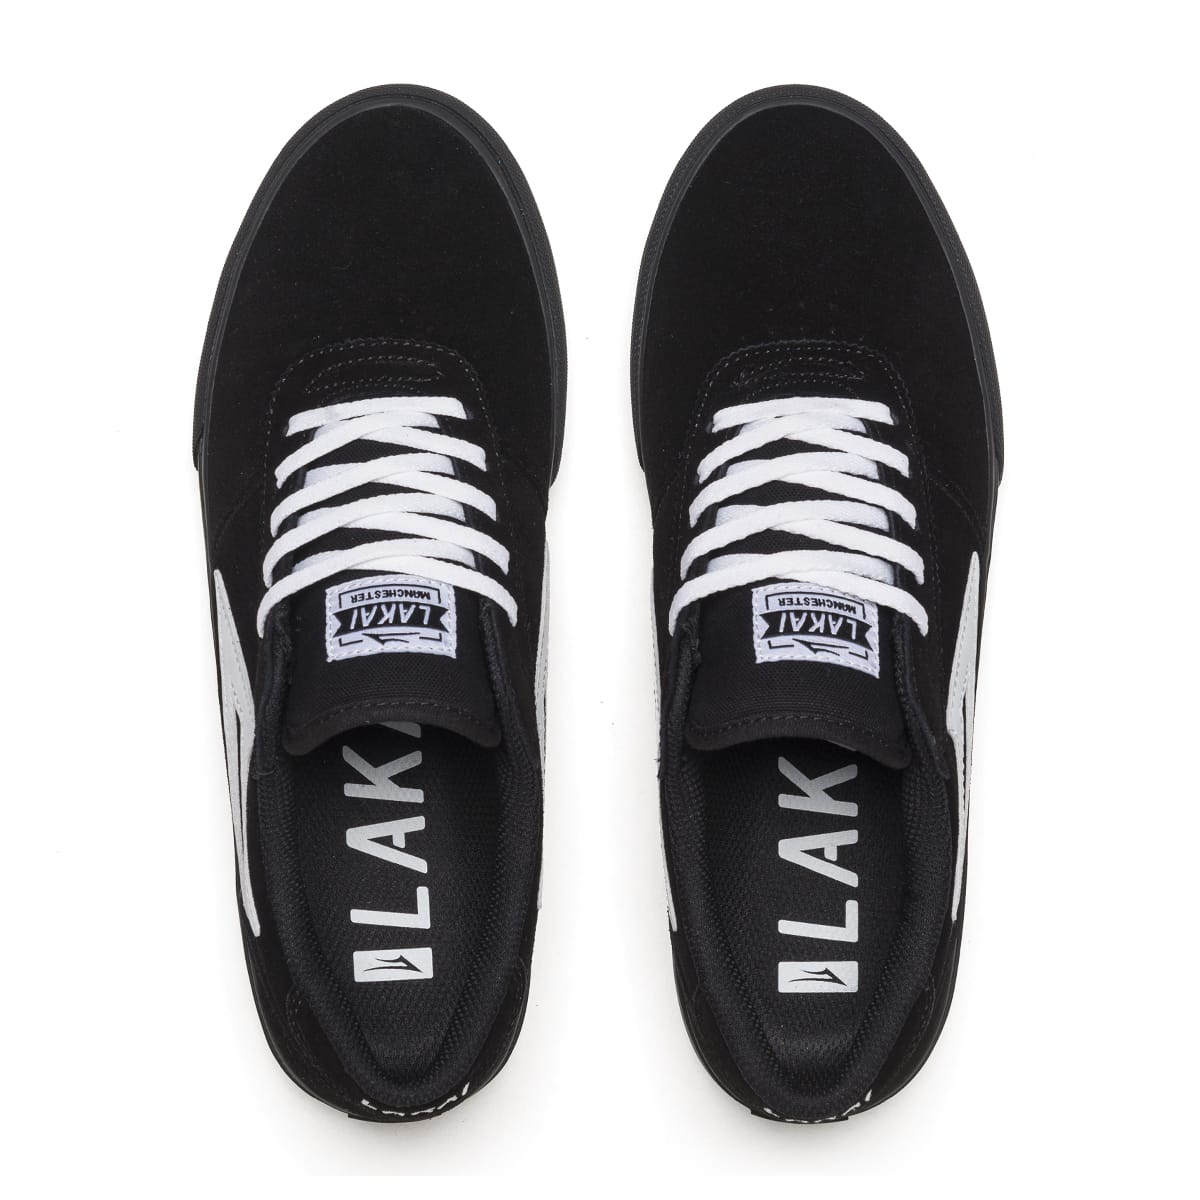 Manchester - Black Suede – Lakai Limited Footwear